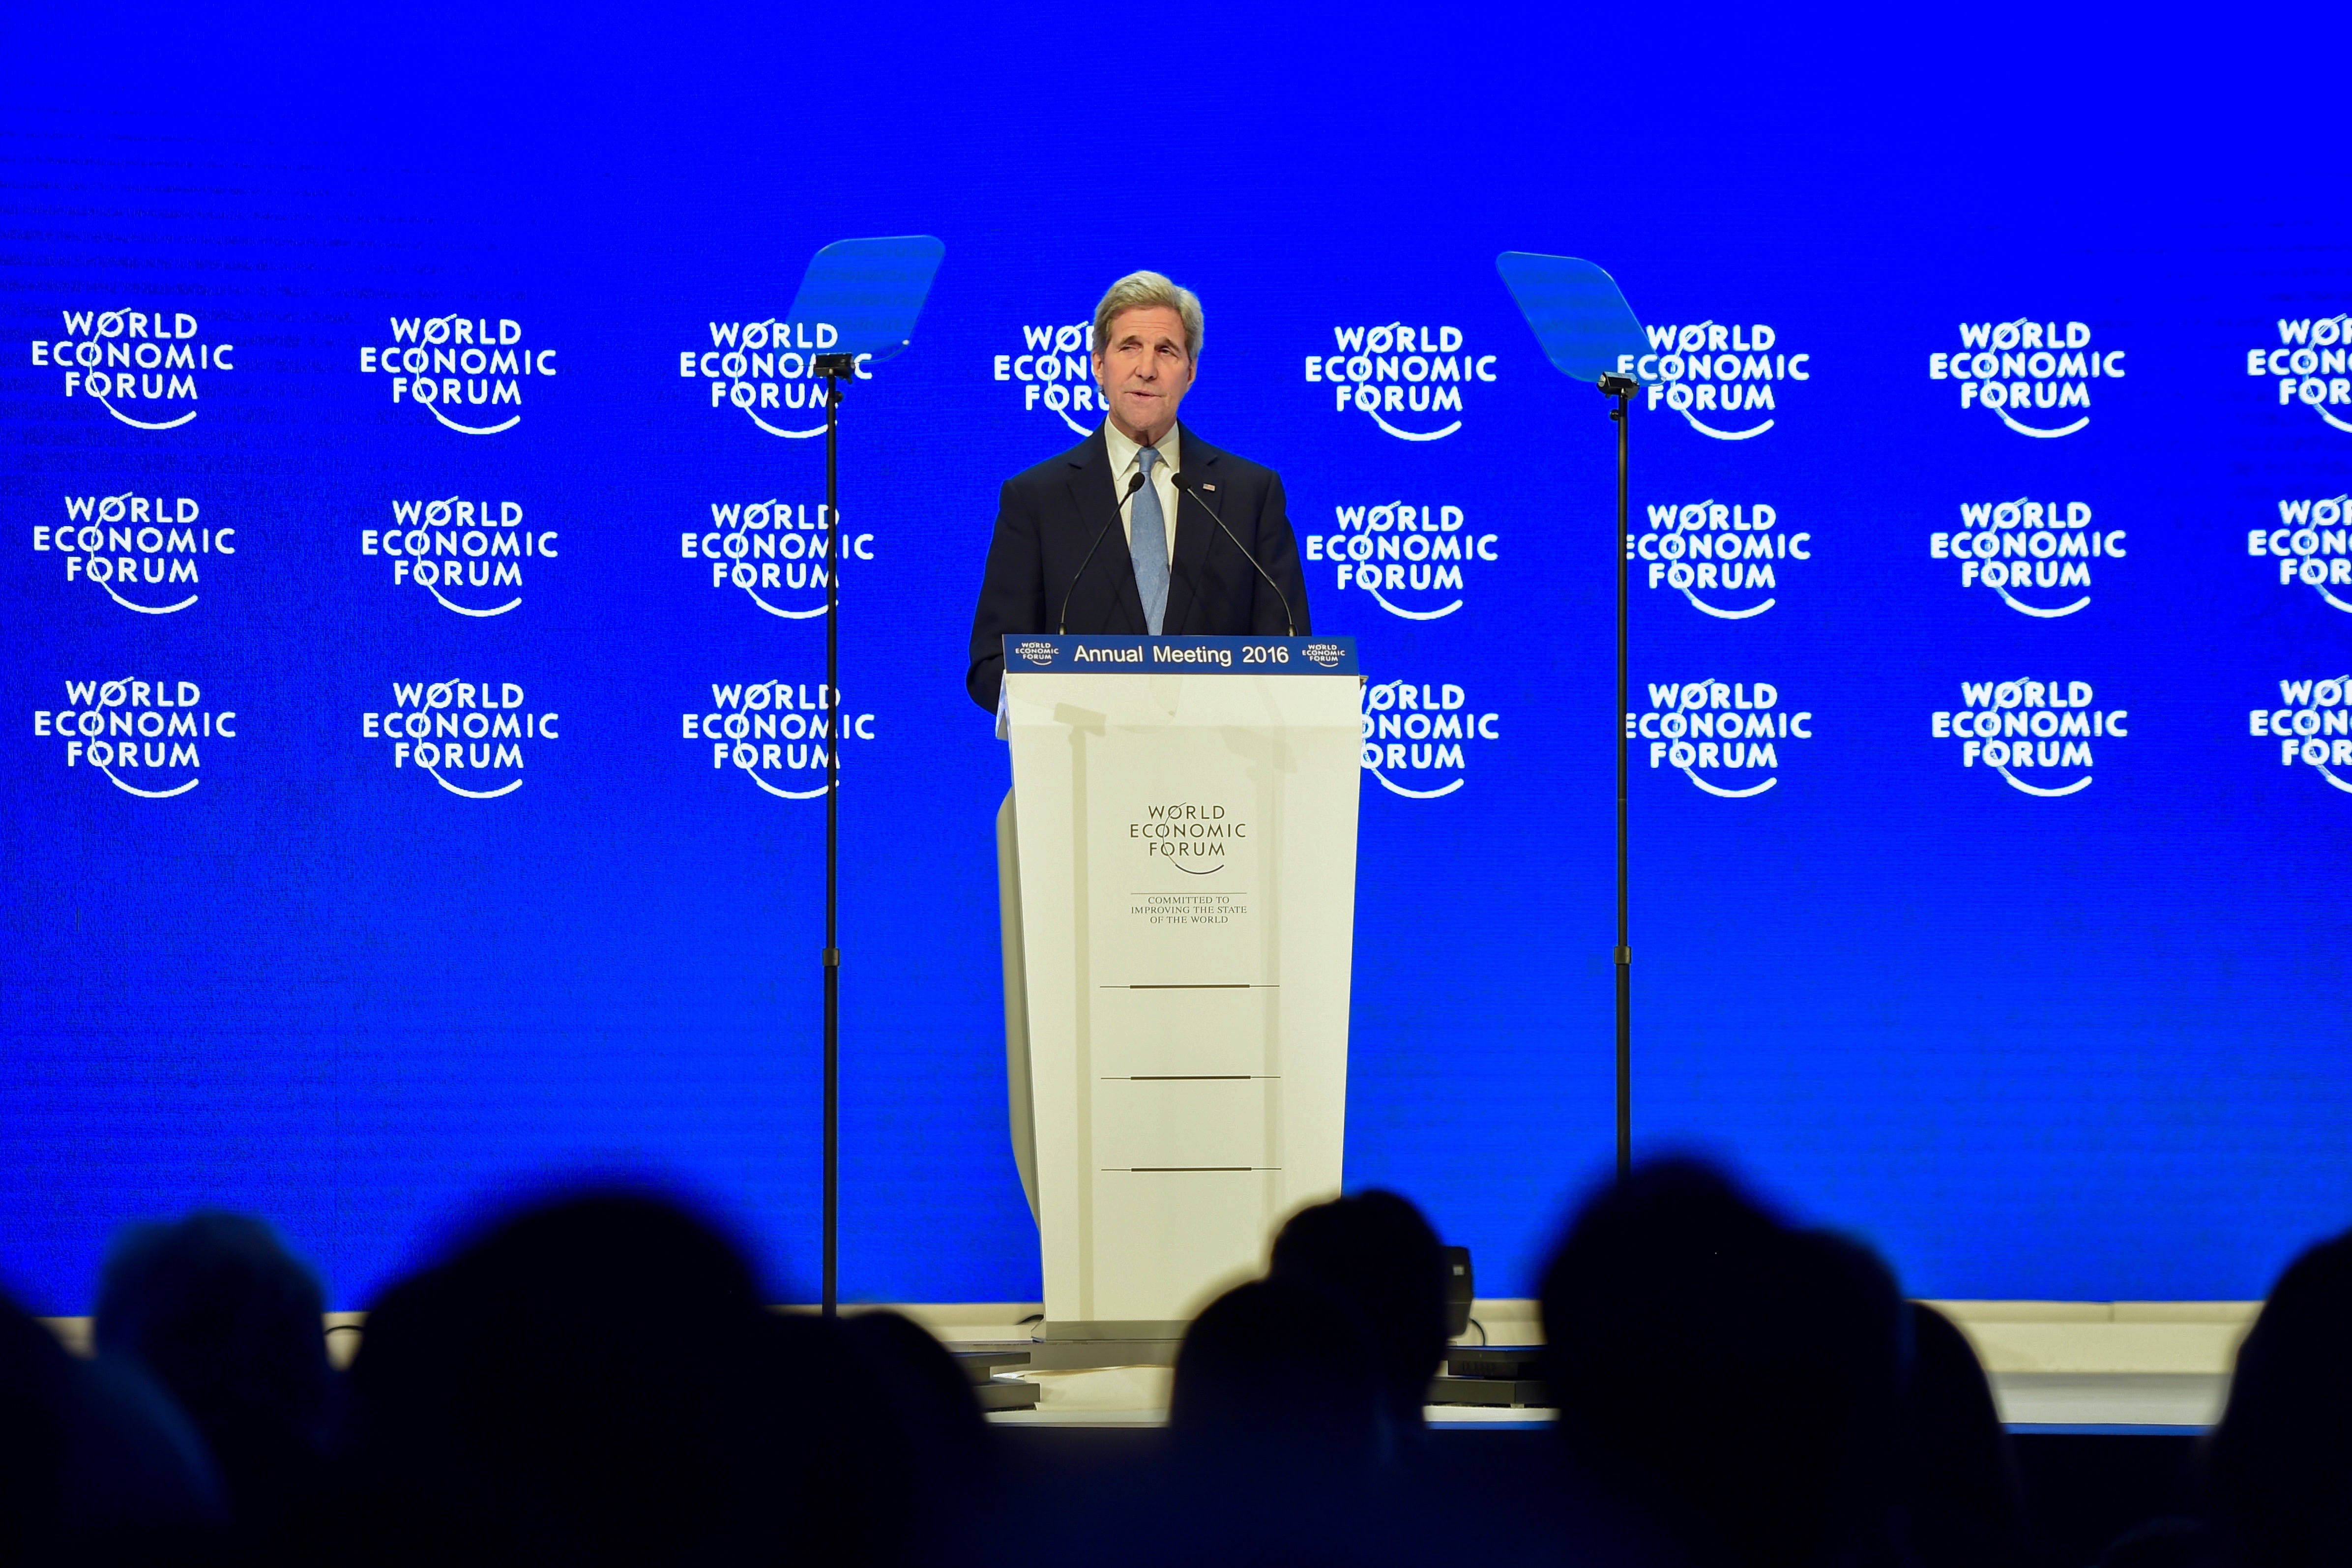 US Secretary of State John Kerry, delivering the keynote speech at the World Economic Forum